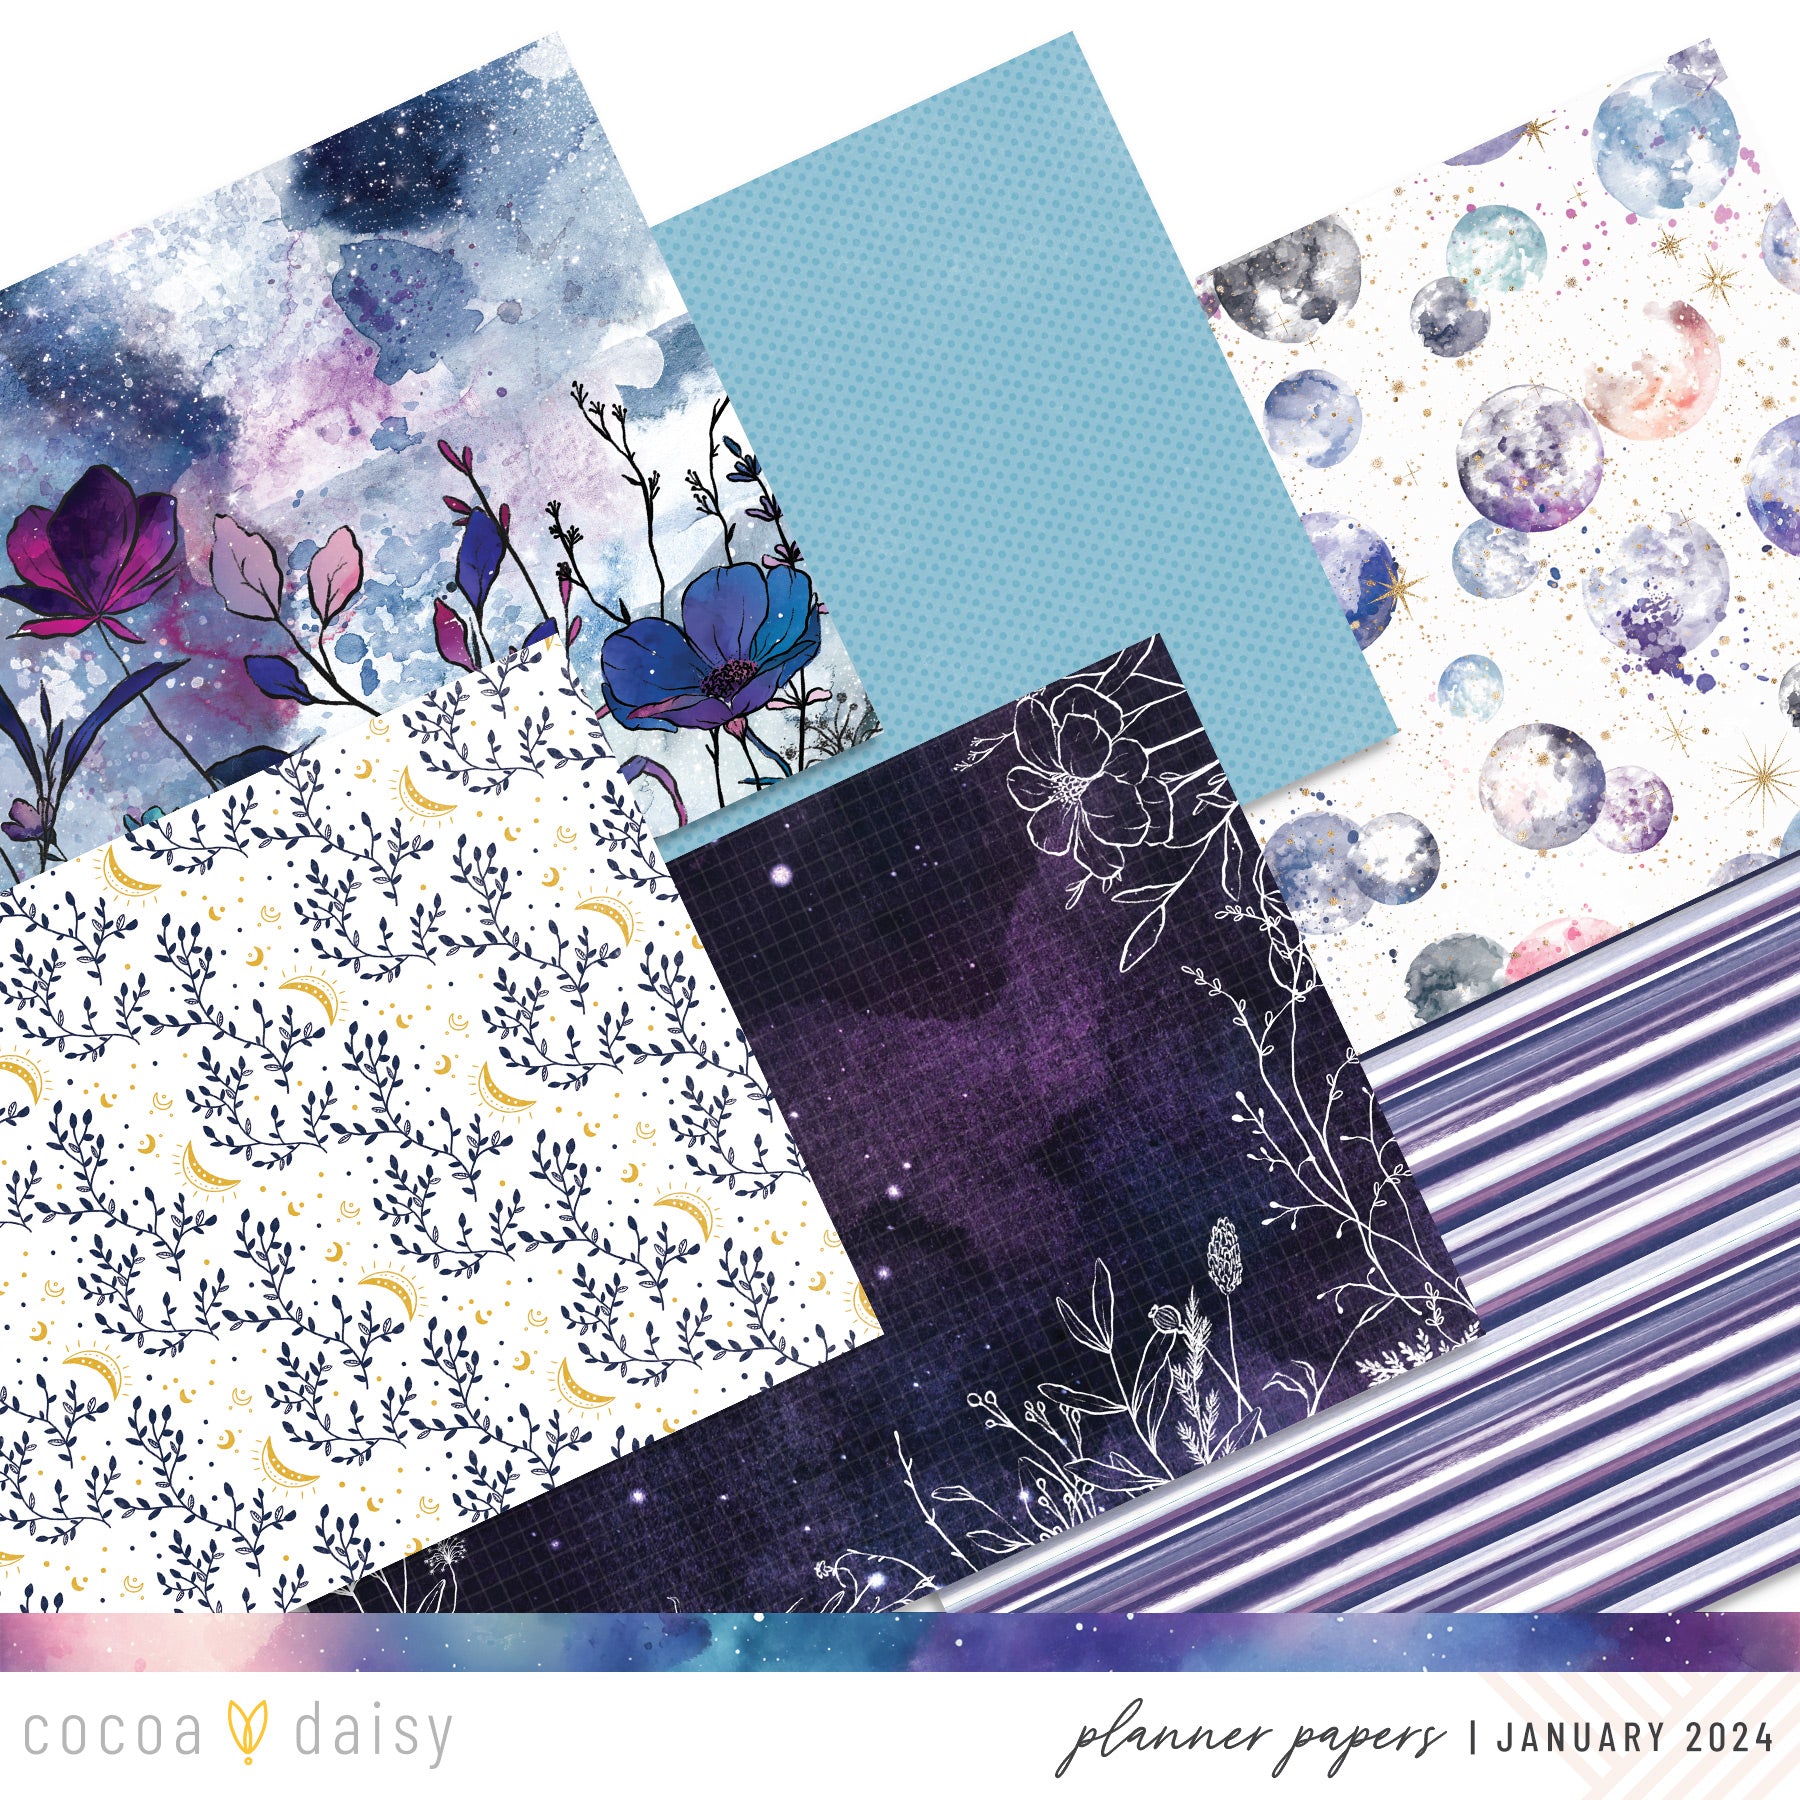 Silent Moon Extra Papers from The Planner Kit January 2024